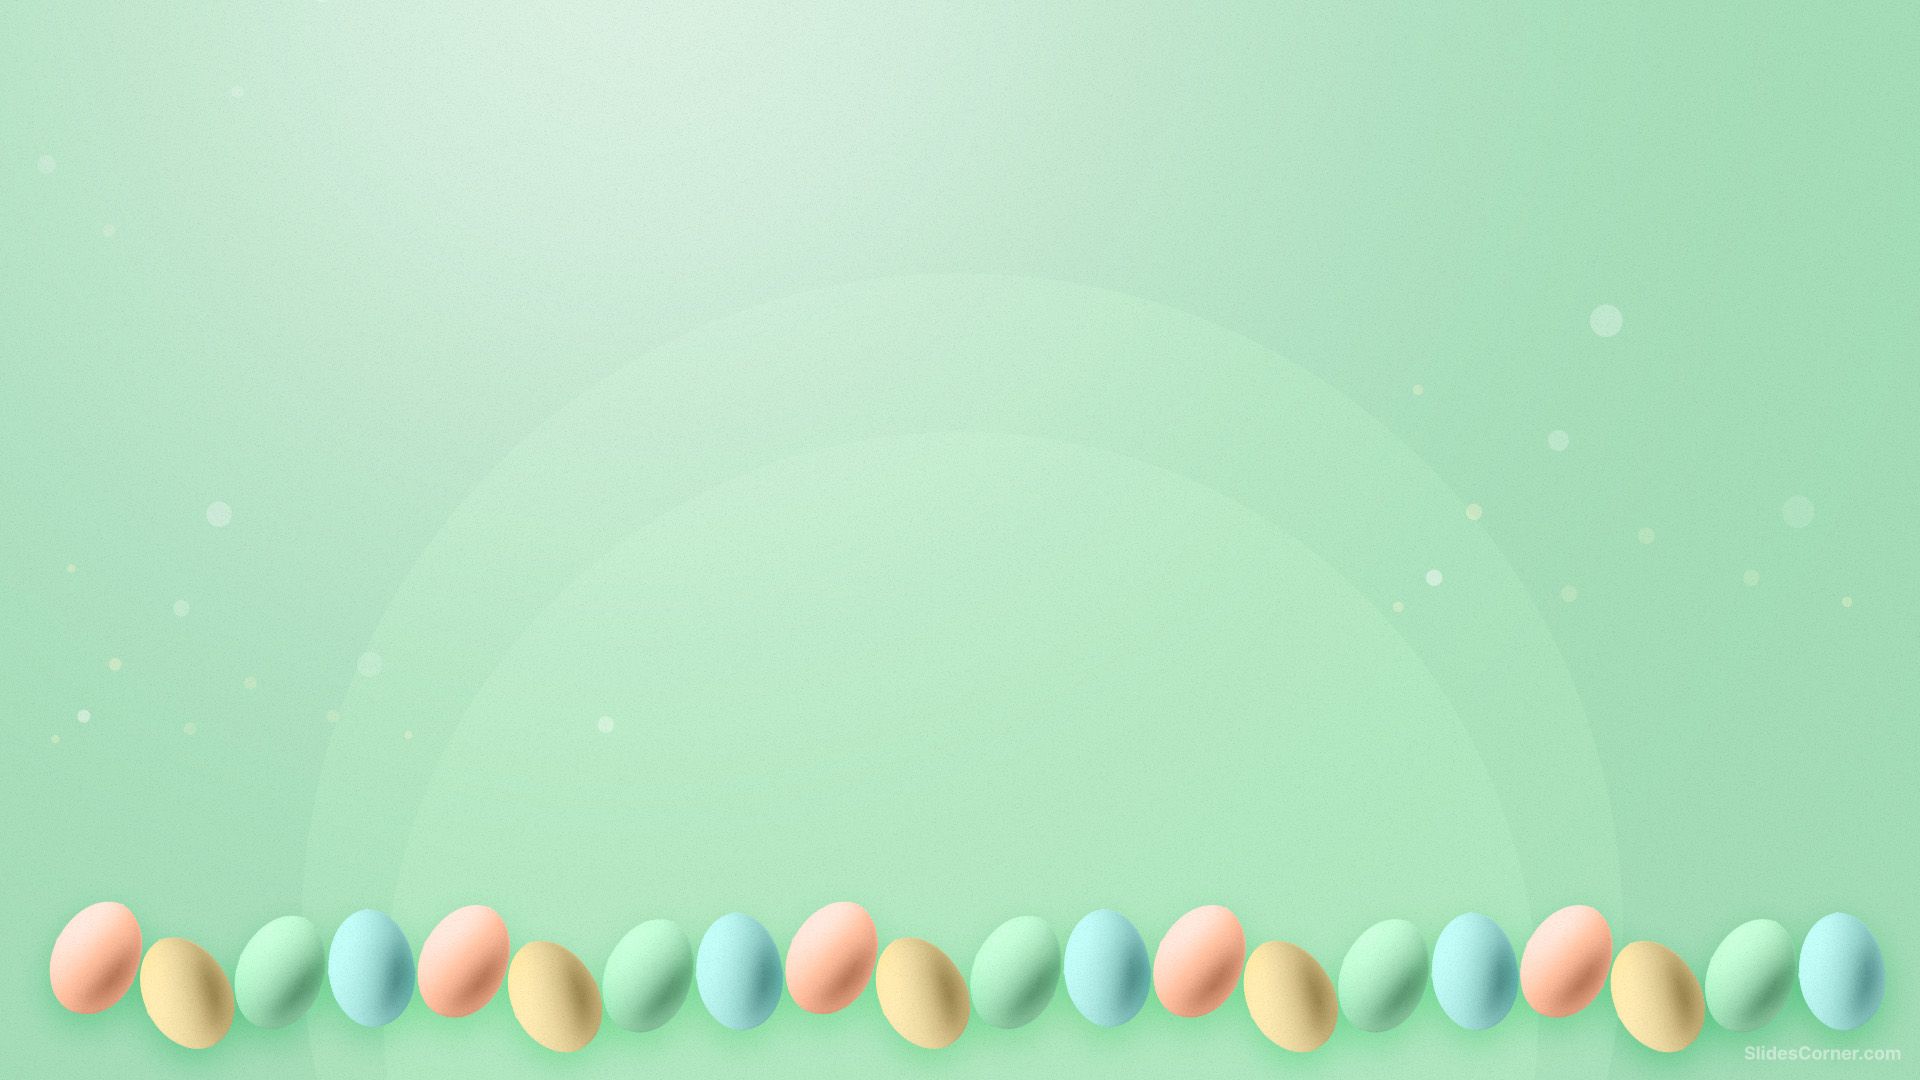 Happy Easter Pastel Background & Wallpaper